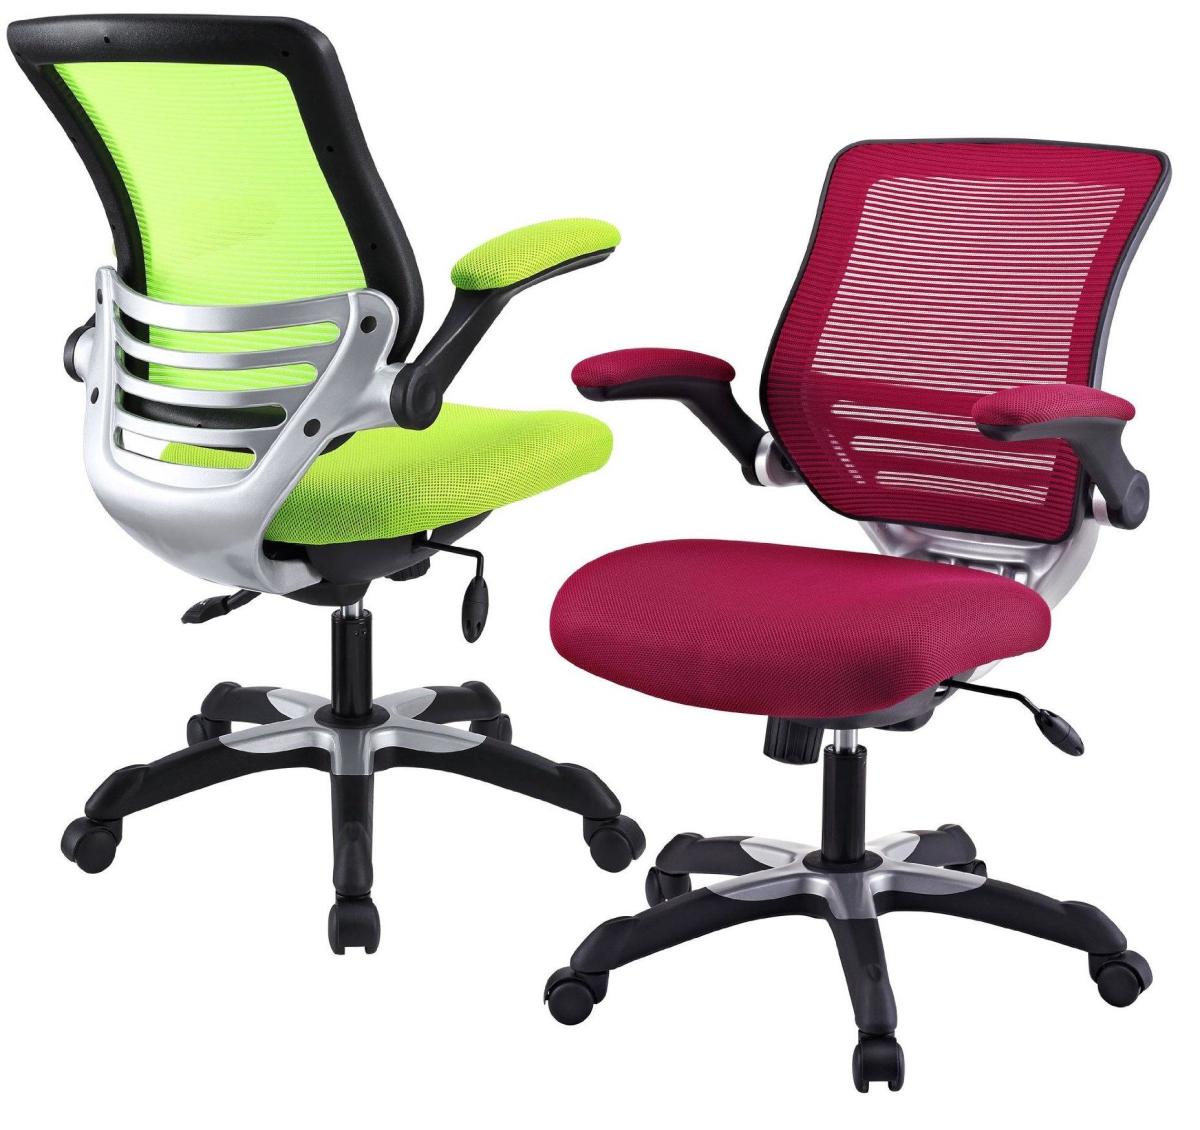 Best Ergonomic Office Chairs 2015 - HubPages